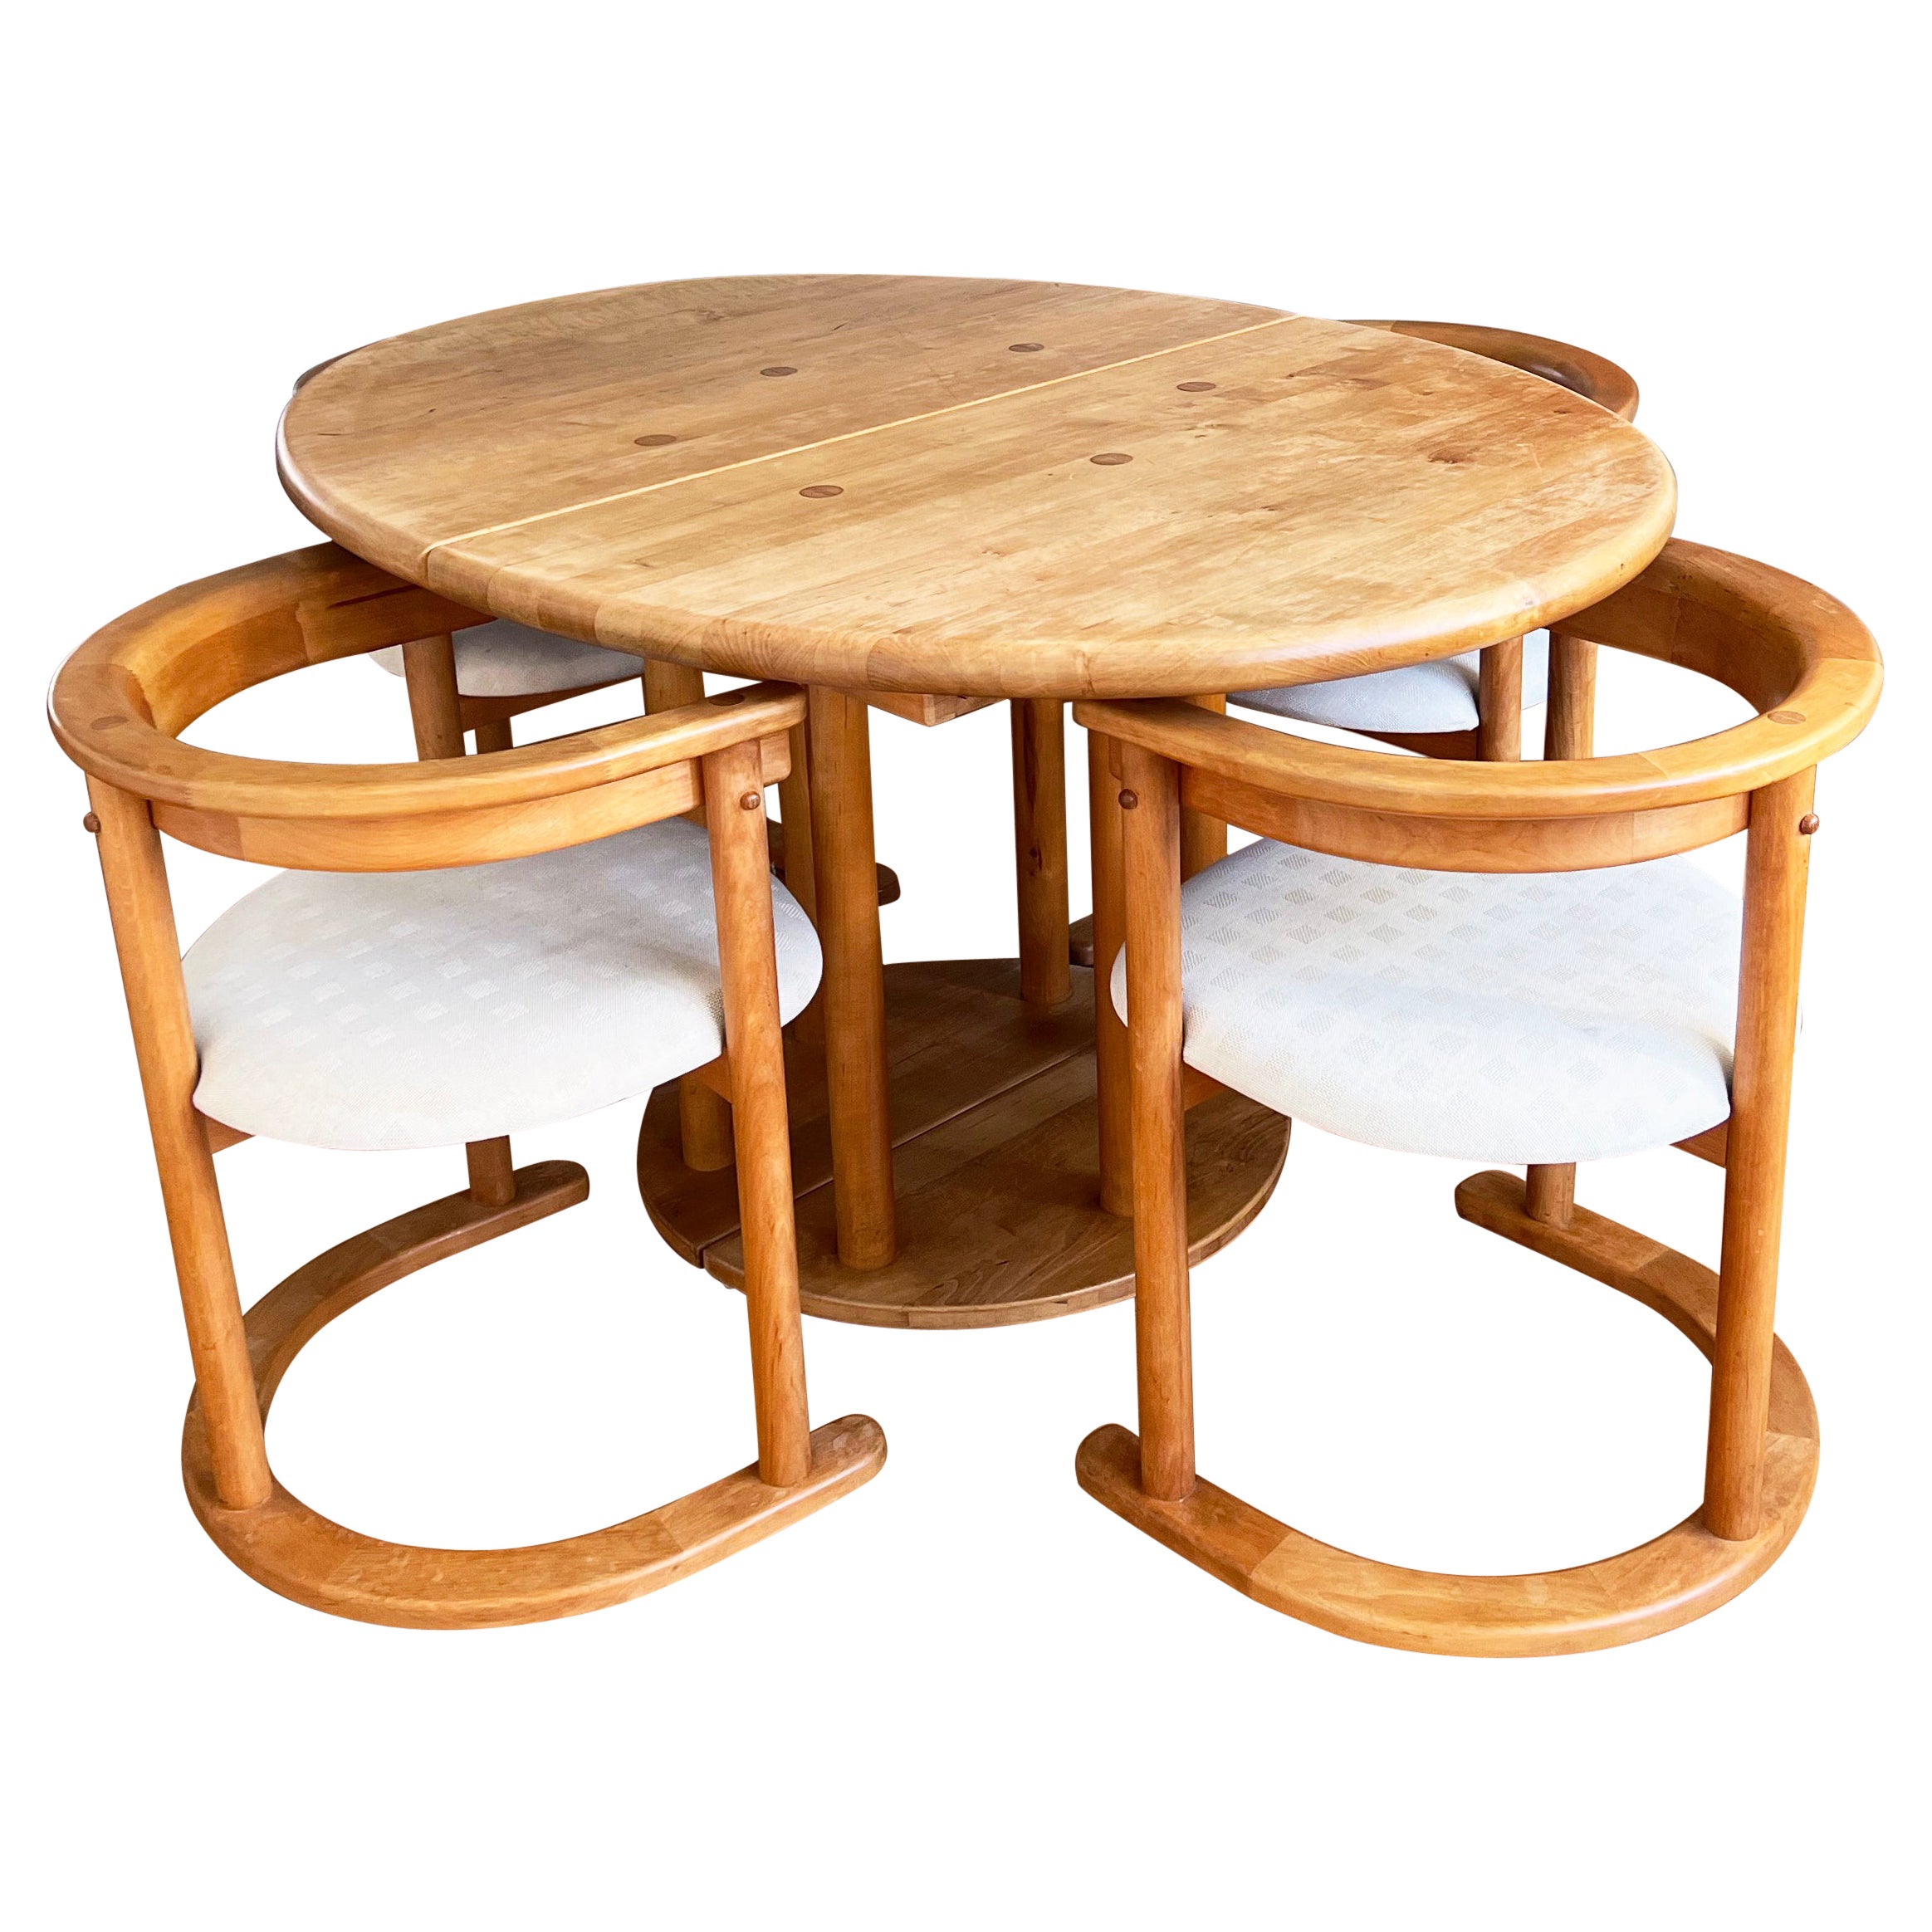 Round Post Modern Brutalist MCM Beech Dining Table + 6 Chairs, 9 Pcs Set